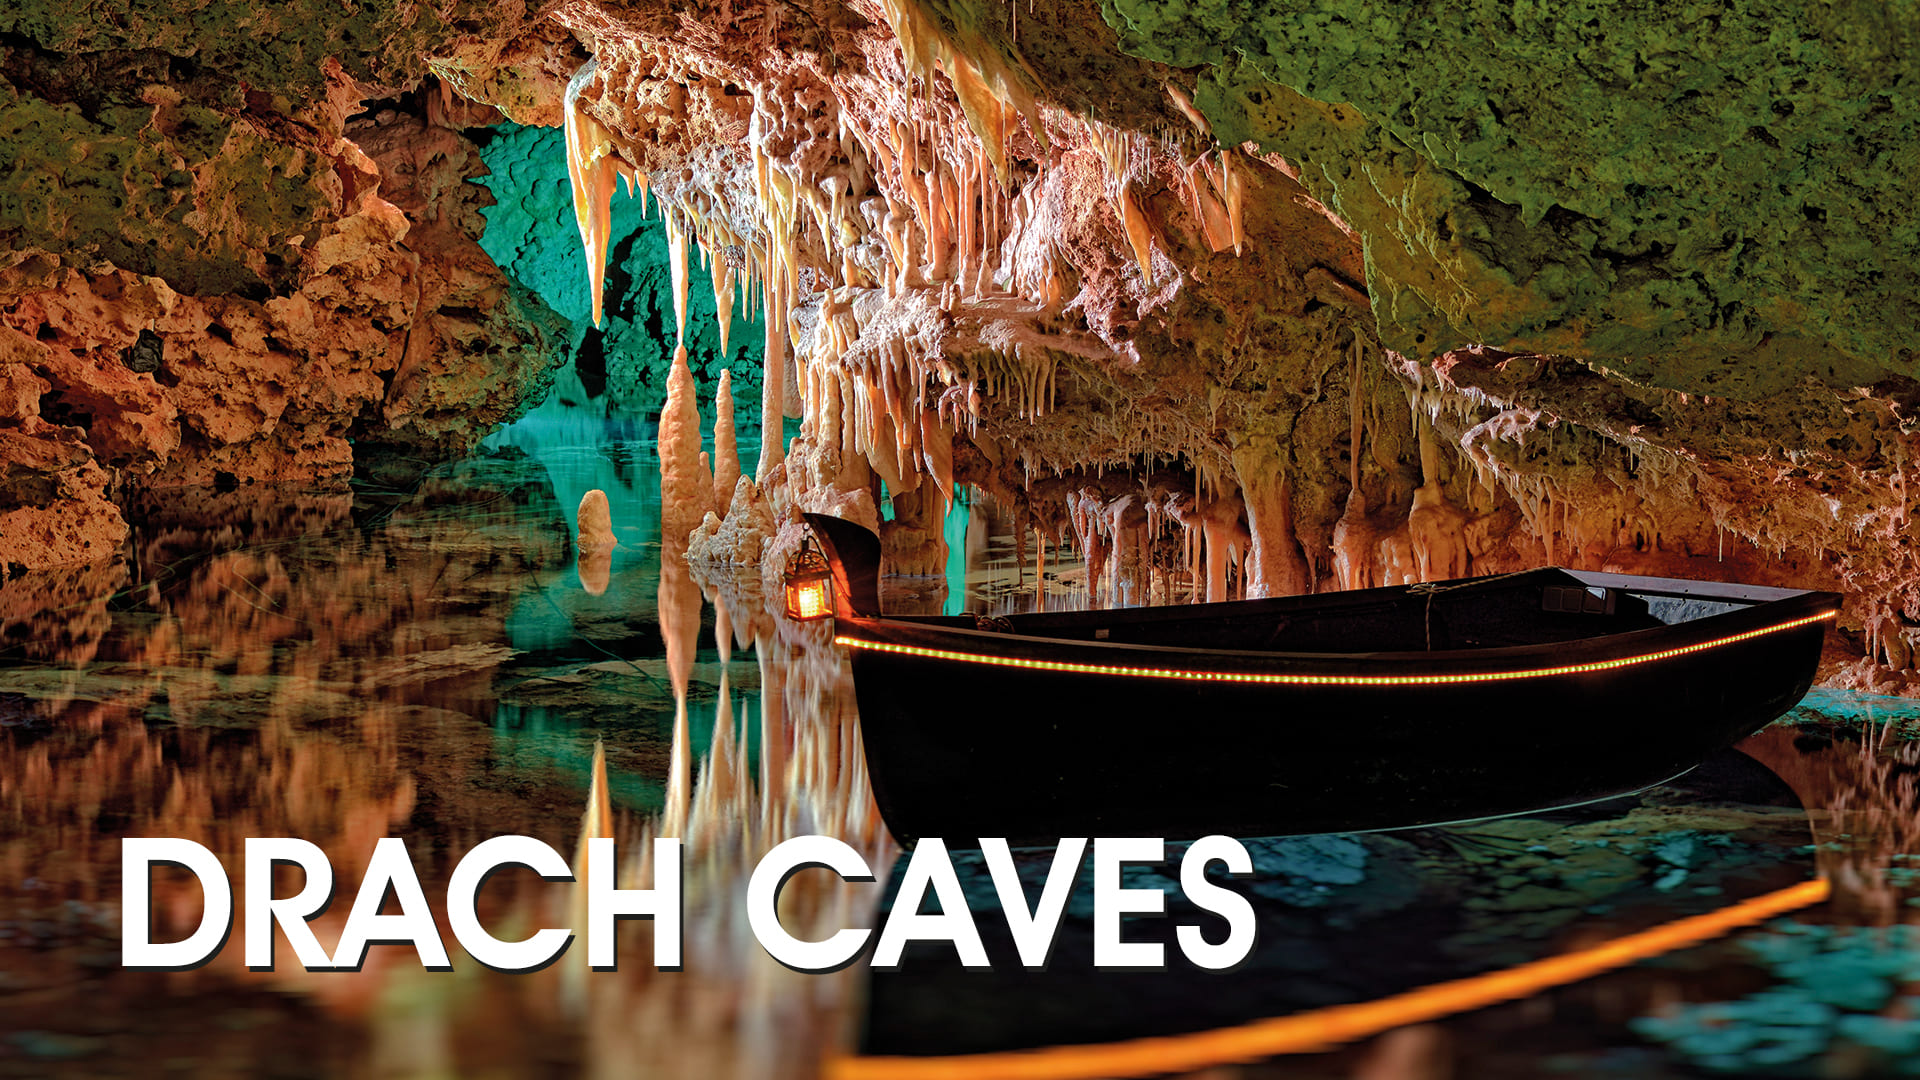 Drach caves half day and full day